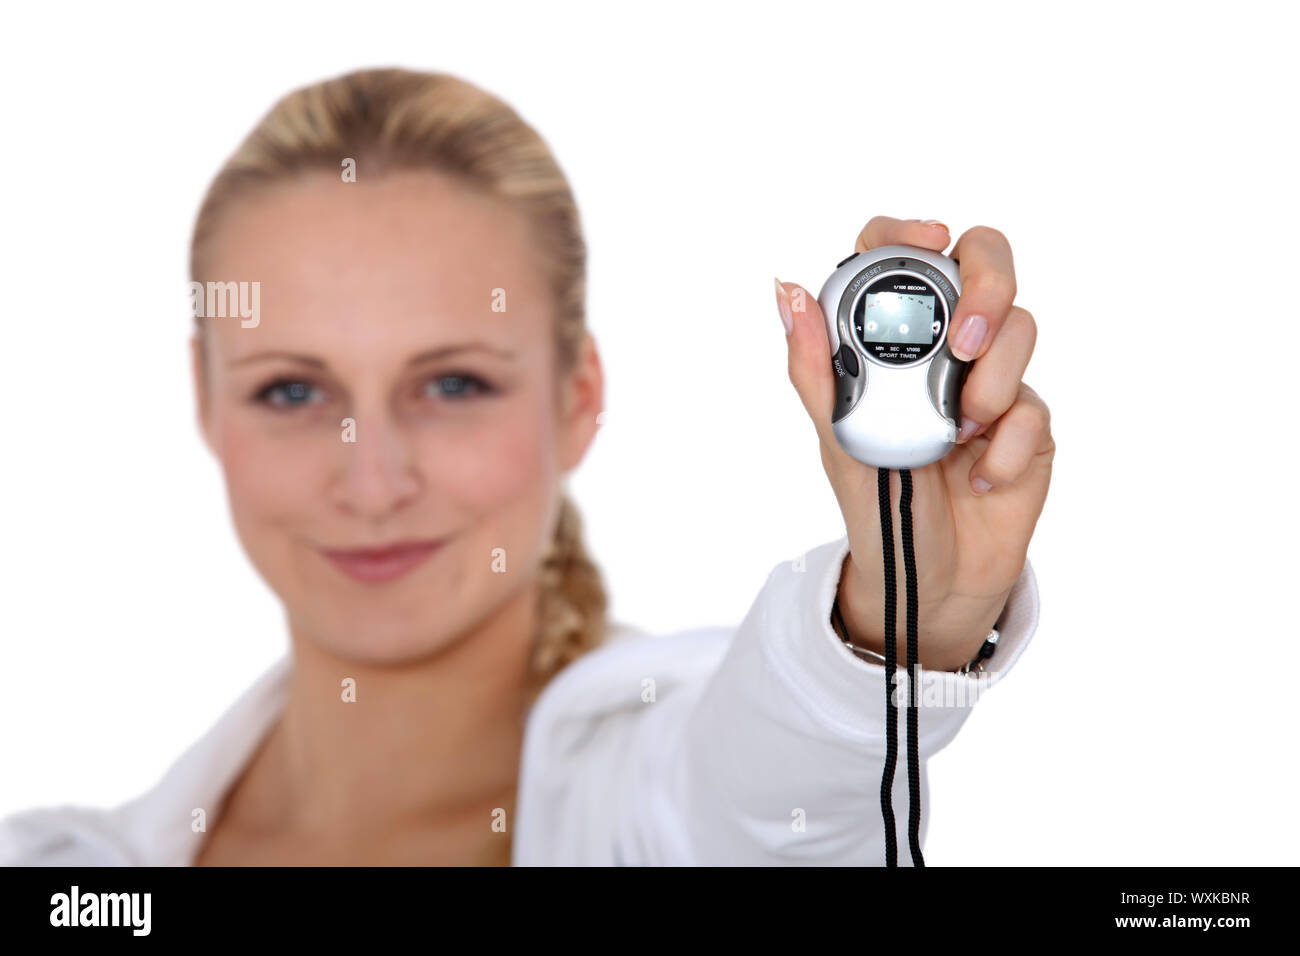 Woman holding stop watch Stock Photo